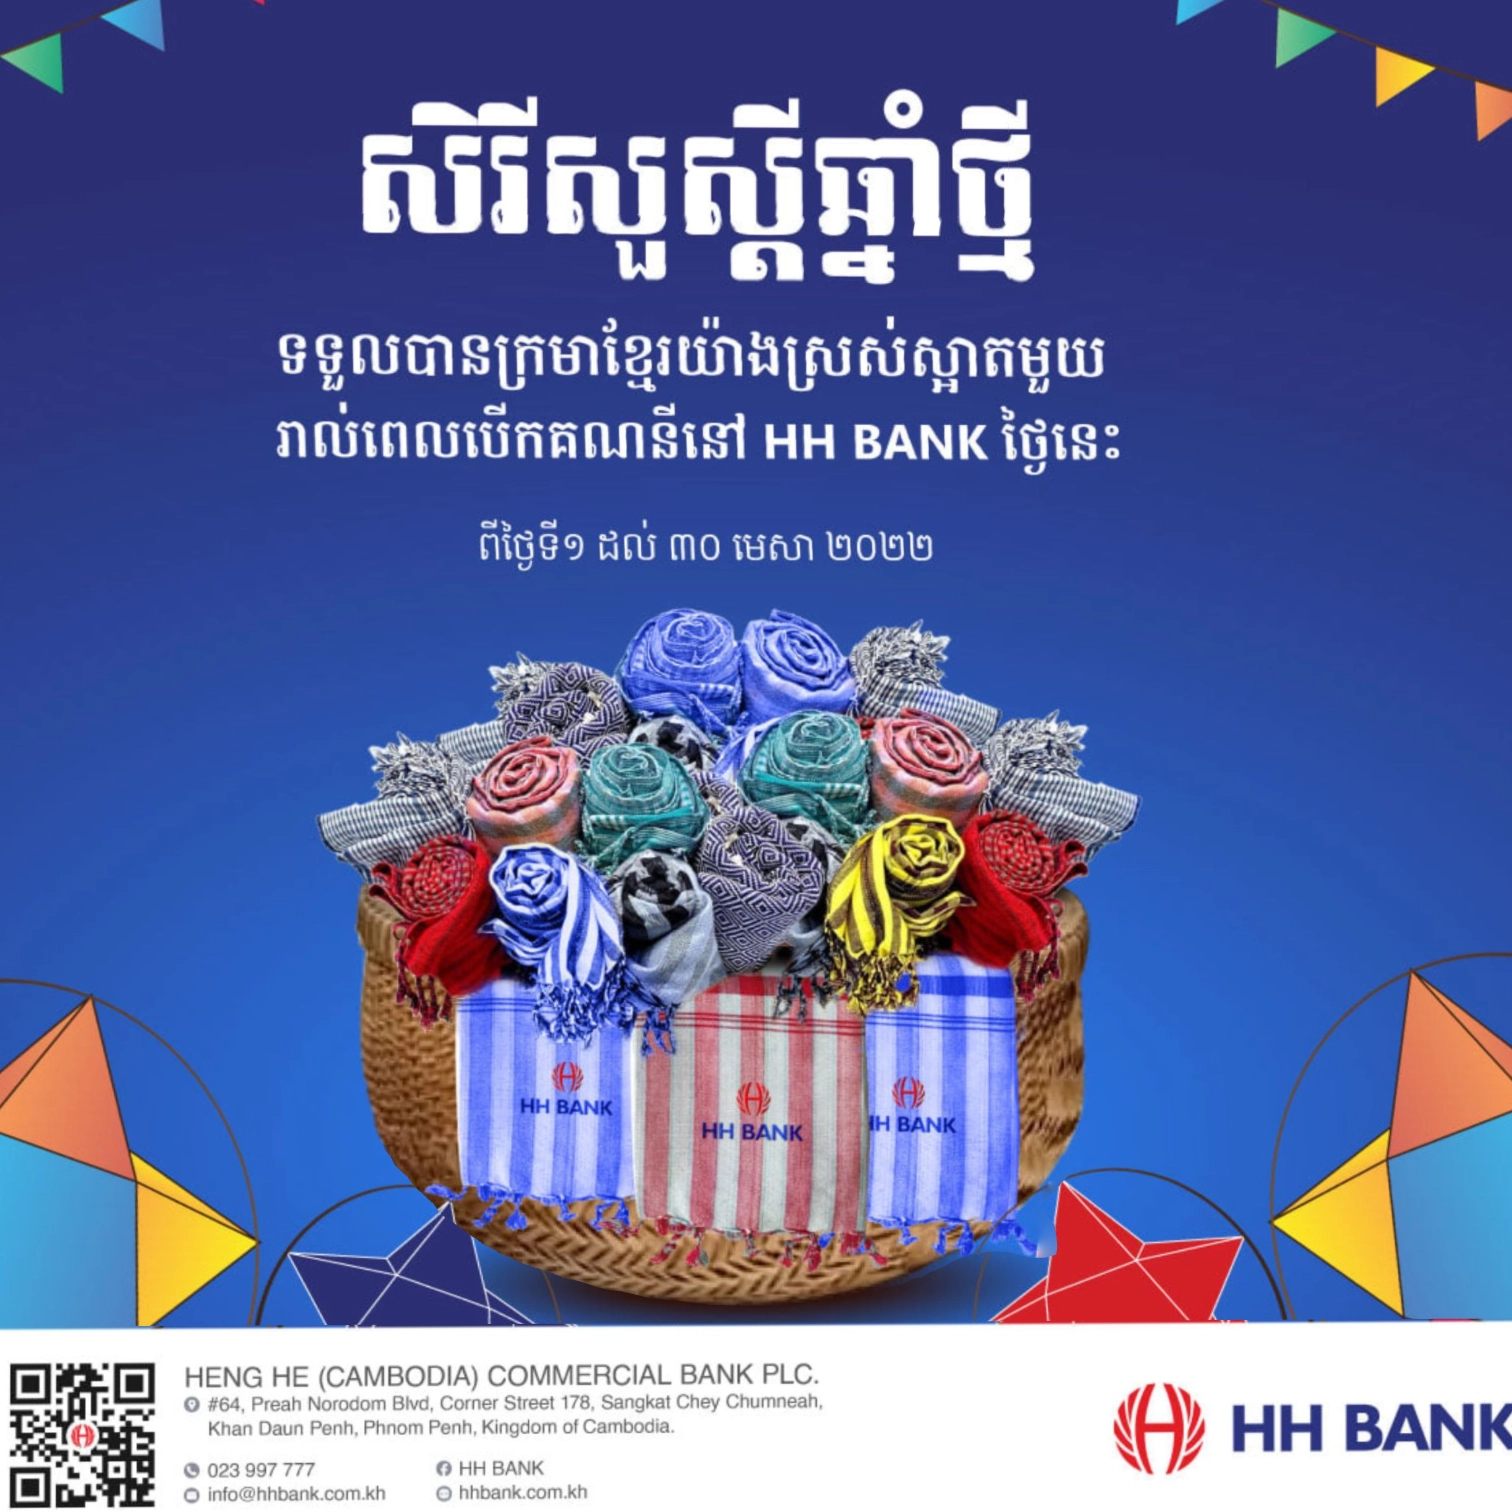 HH BANK customers will receive a beautiful Khmer handmade scarf every Bank Account Opening from...